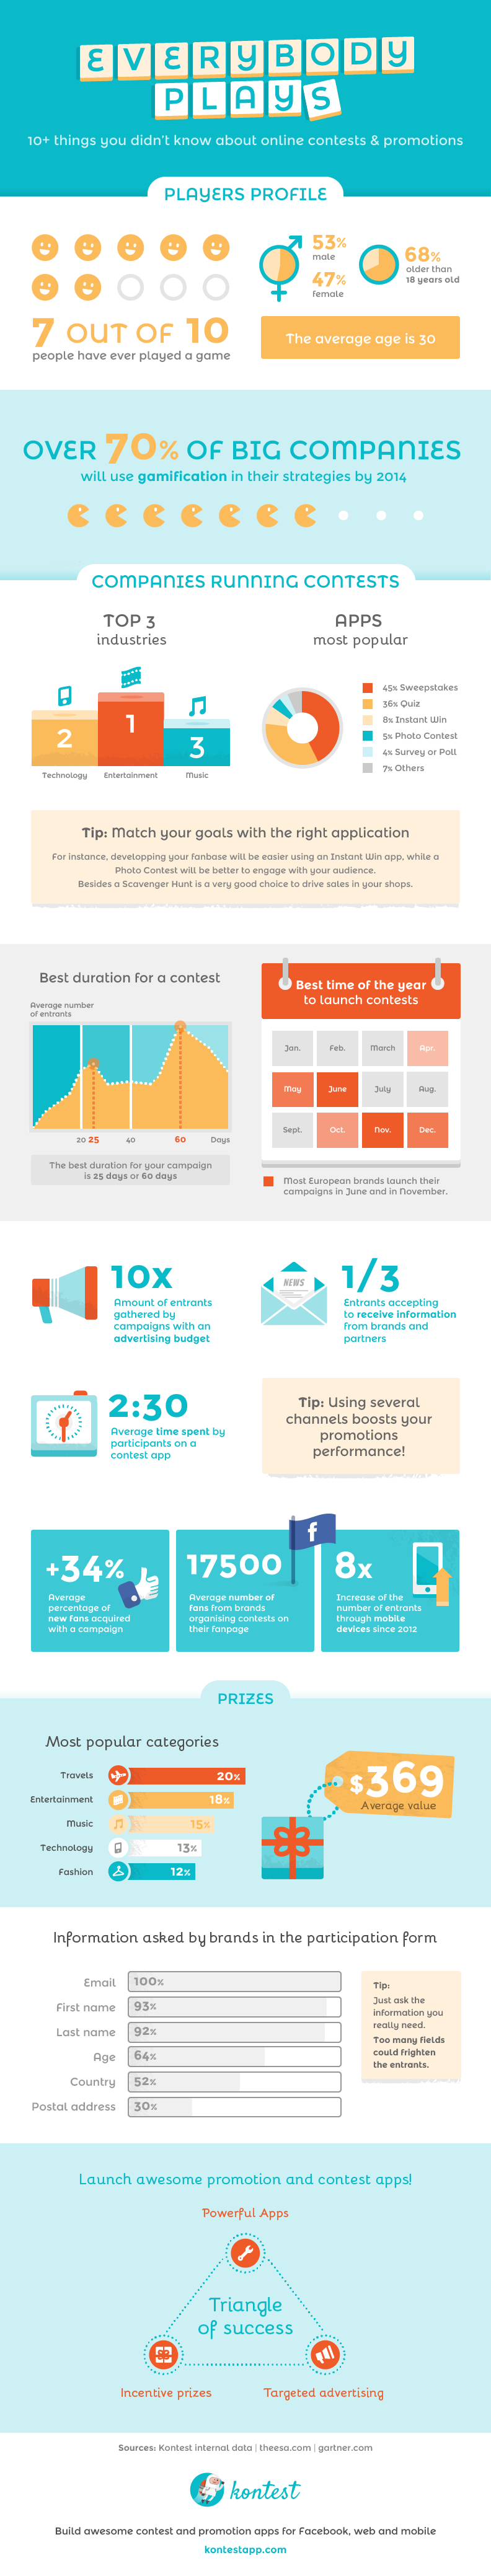 Infographic about contests on Facebook, the web and mobile devices